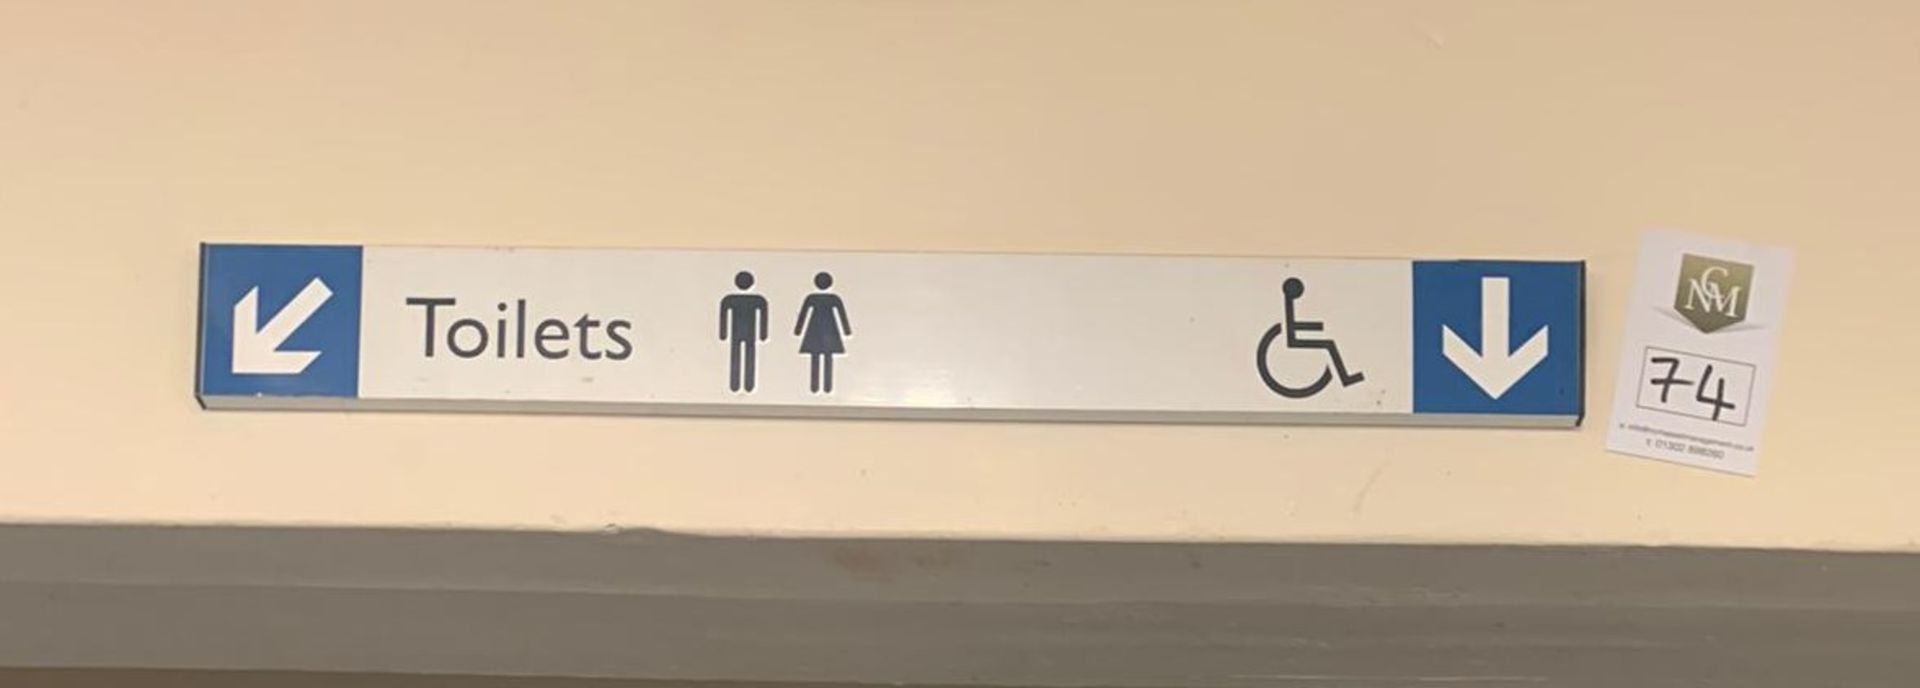 Toilet Sign - Image 2 of 2